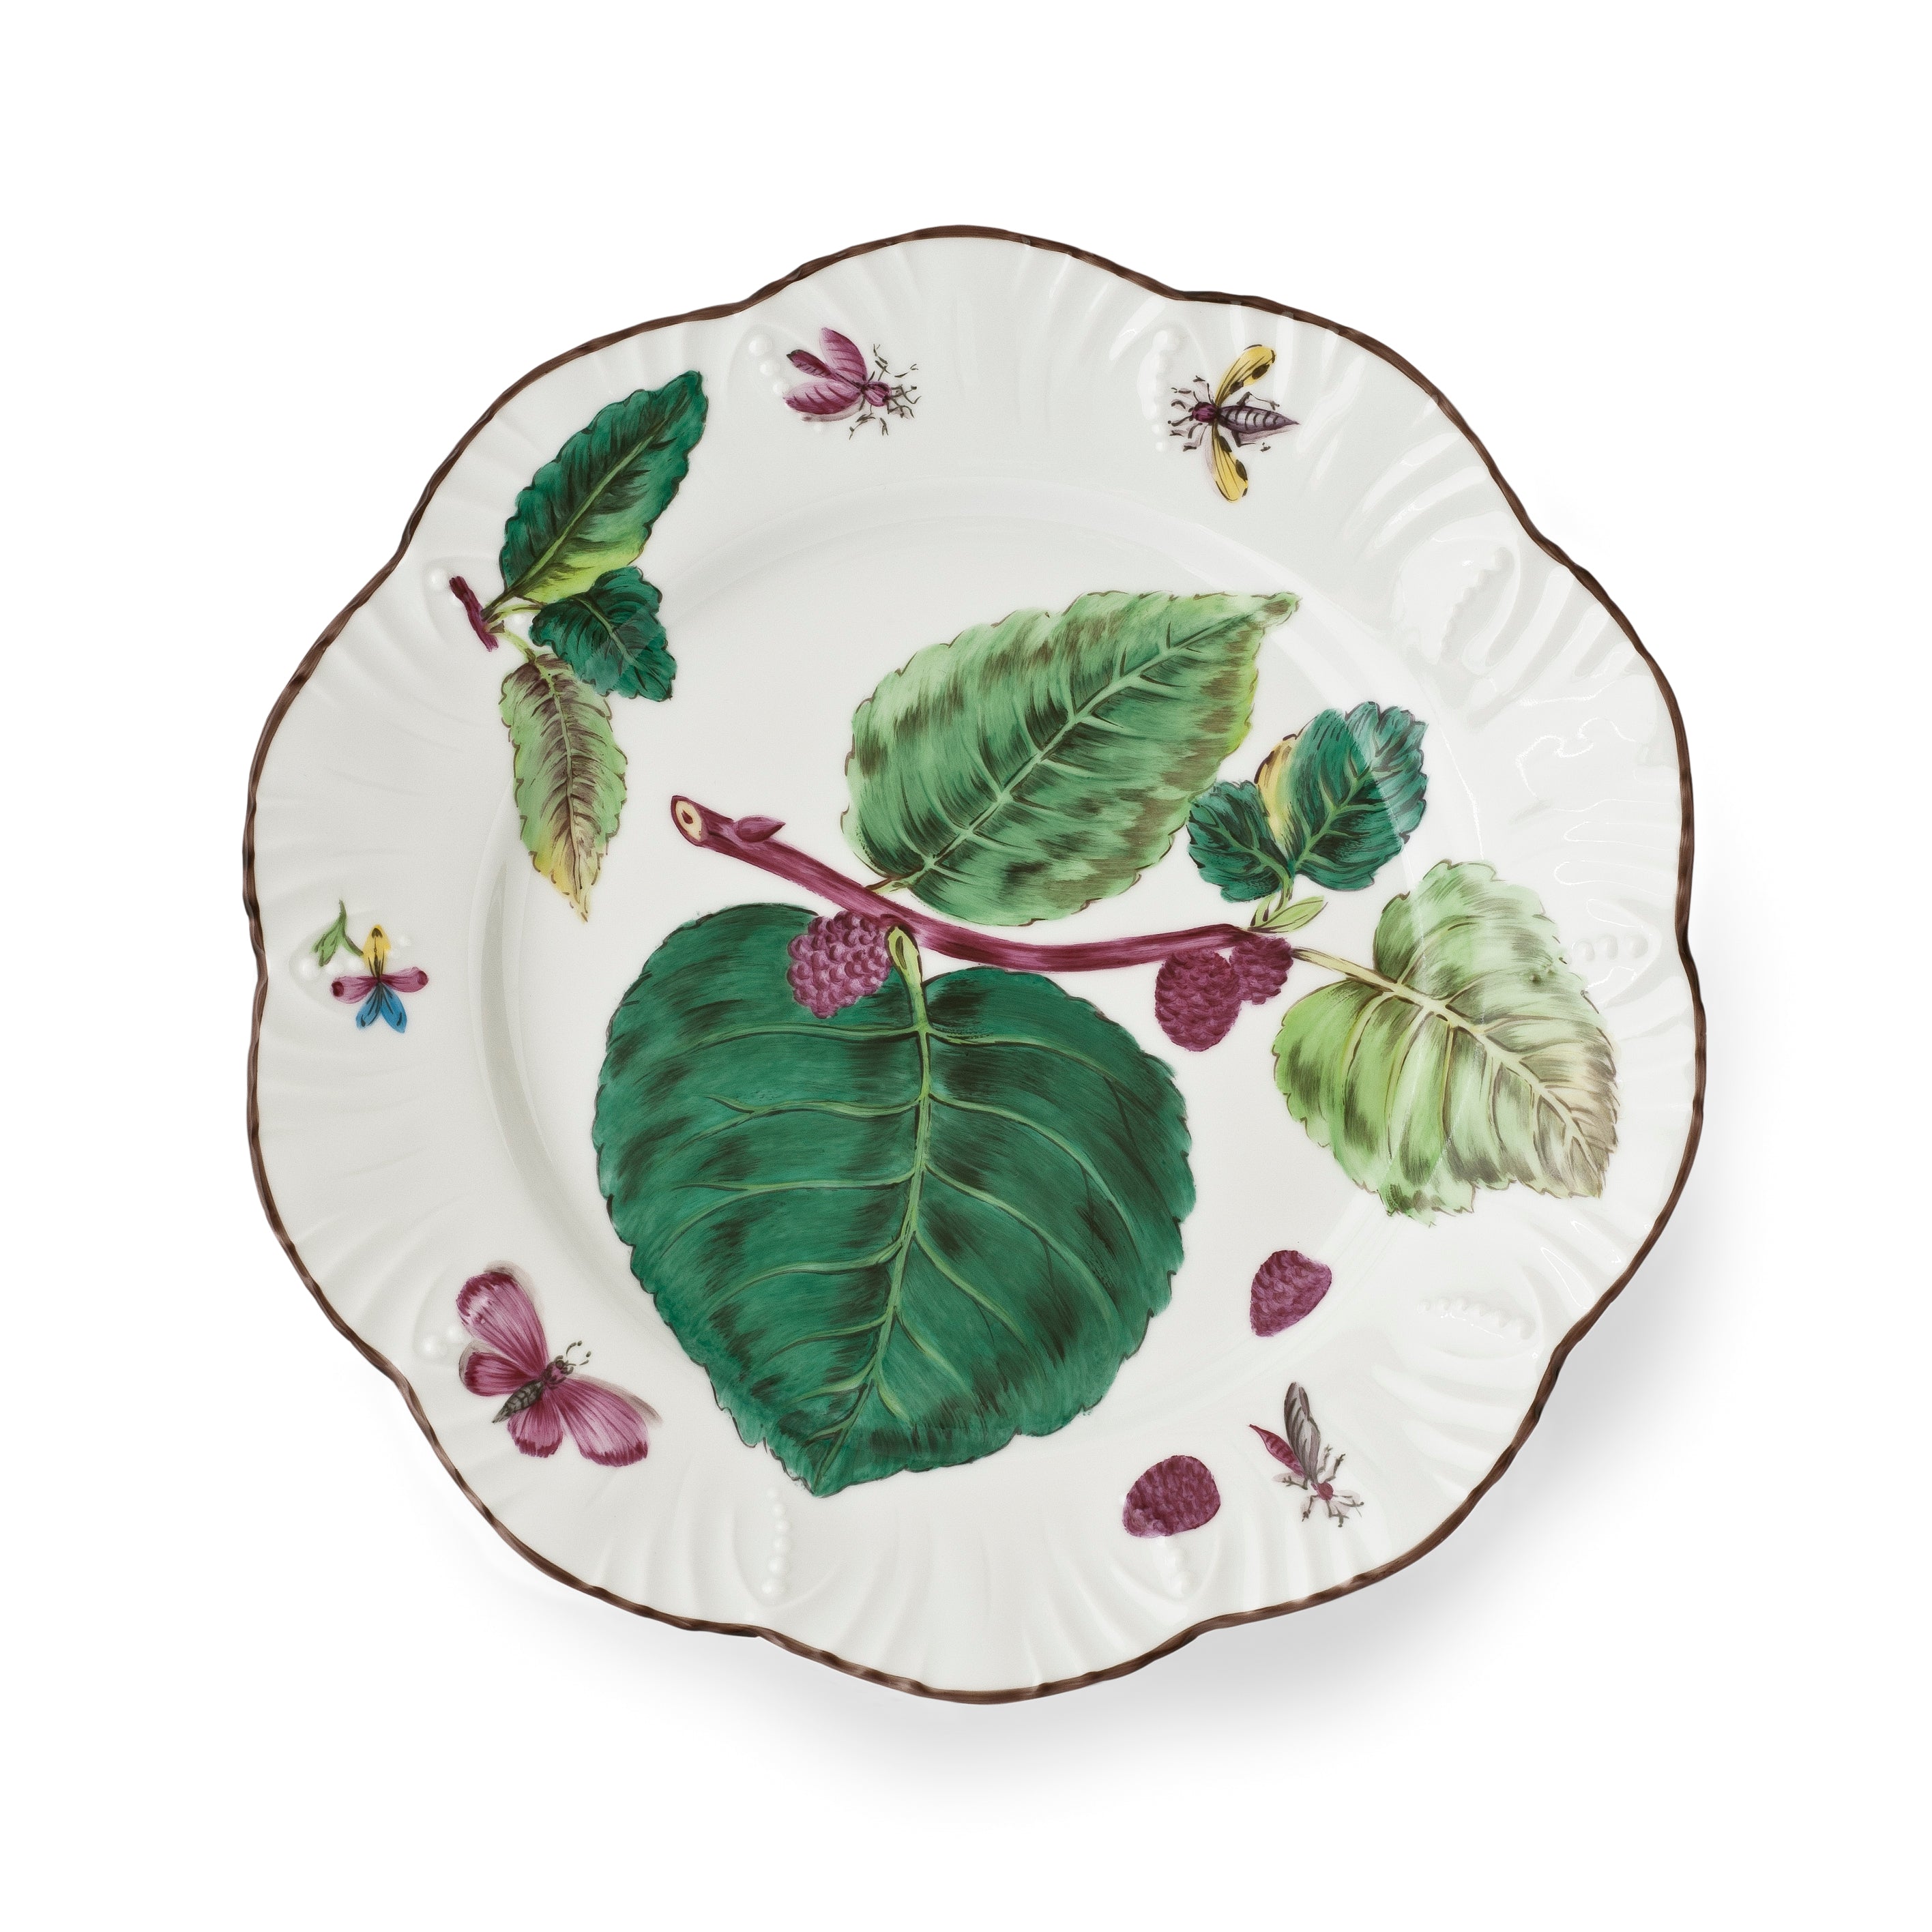 Feuillages - Dinner plate 10